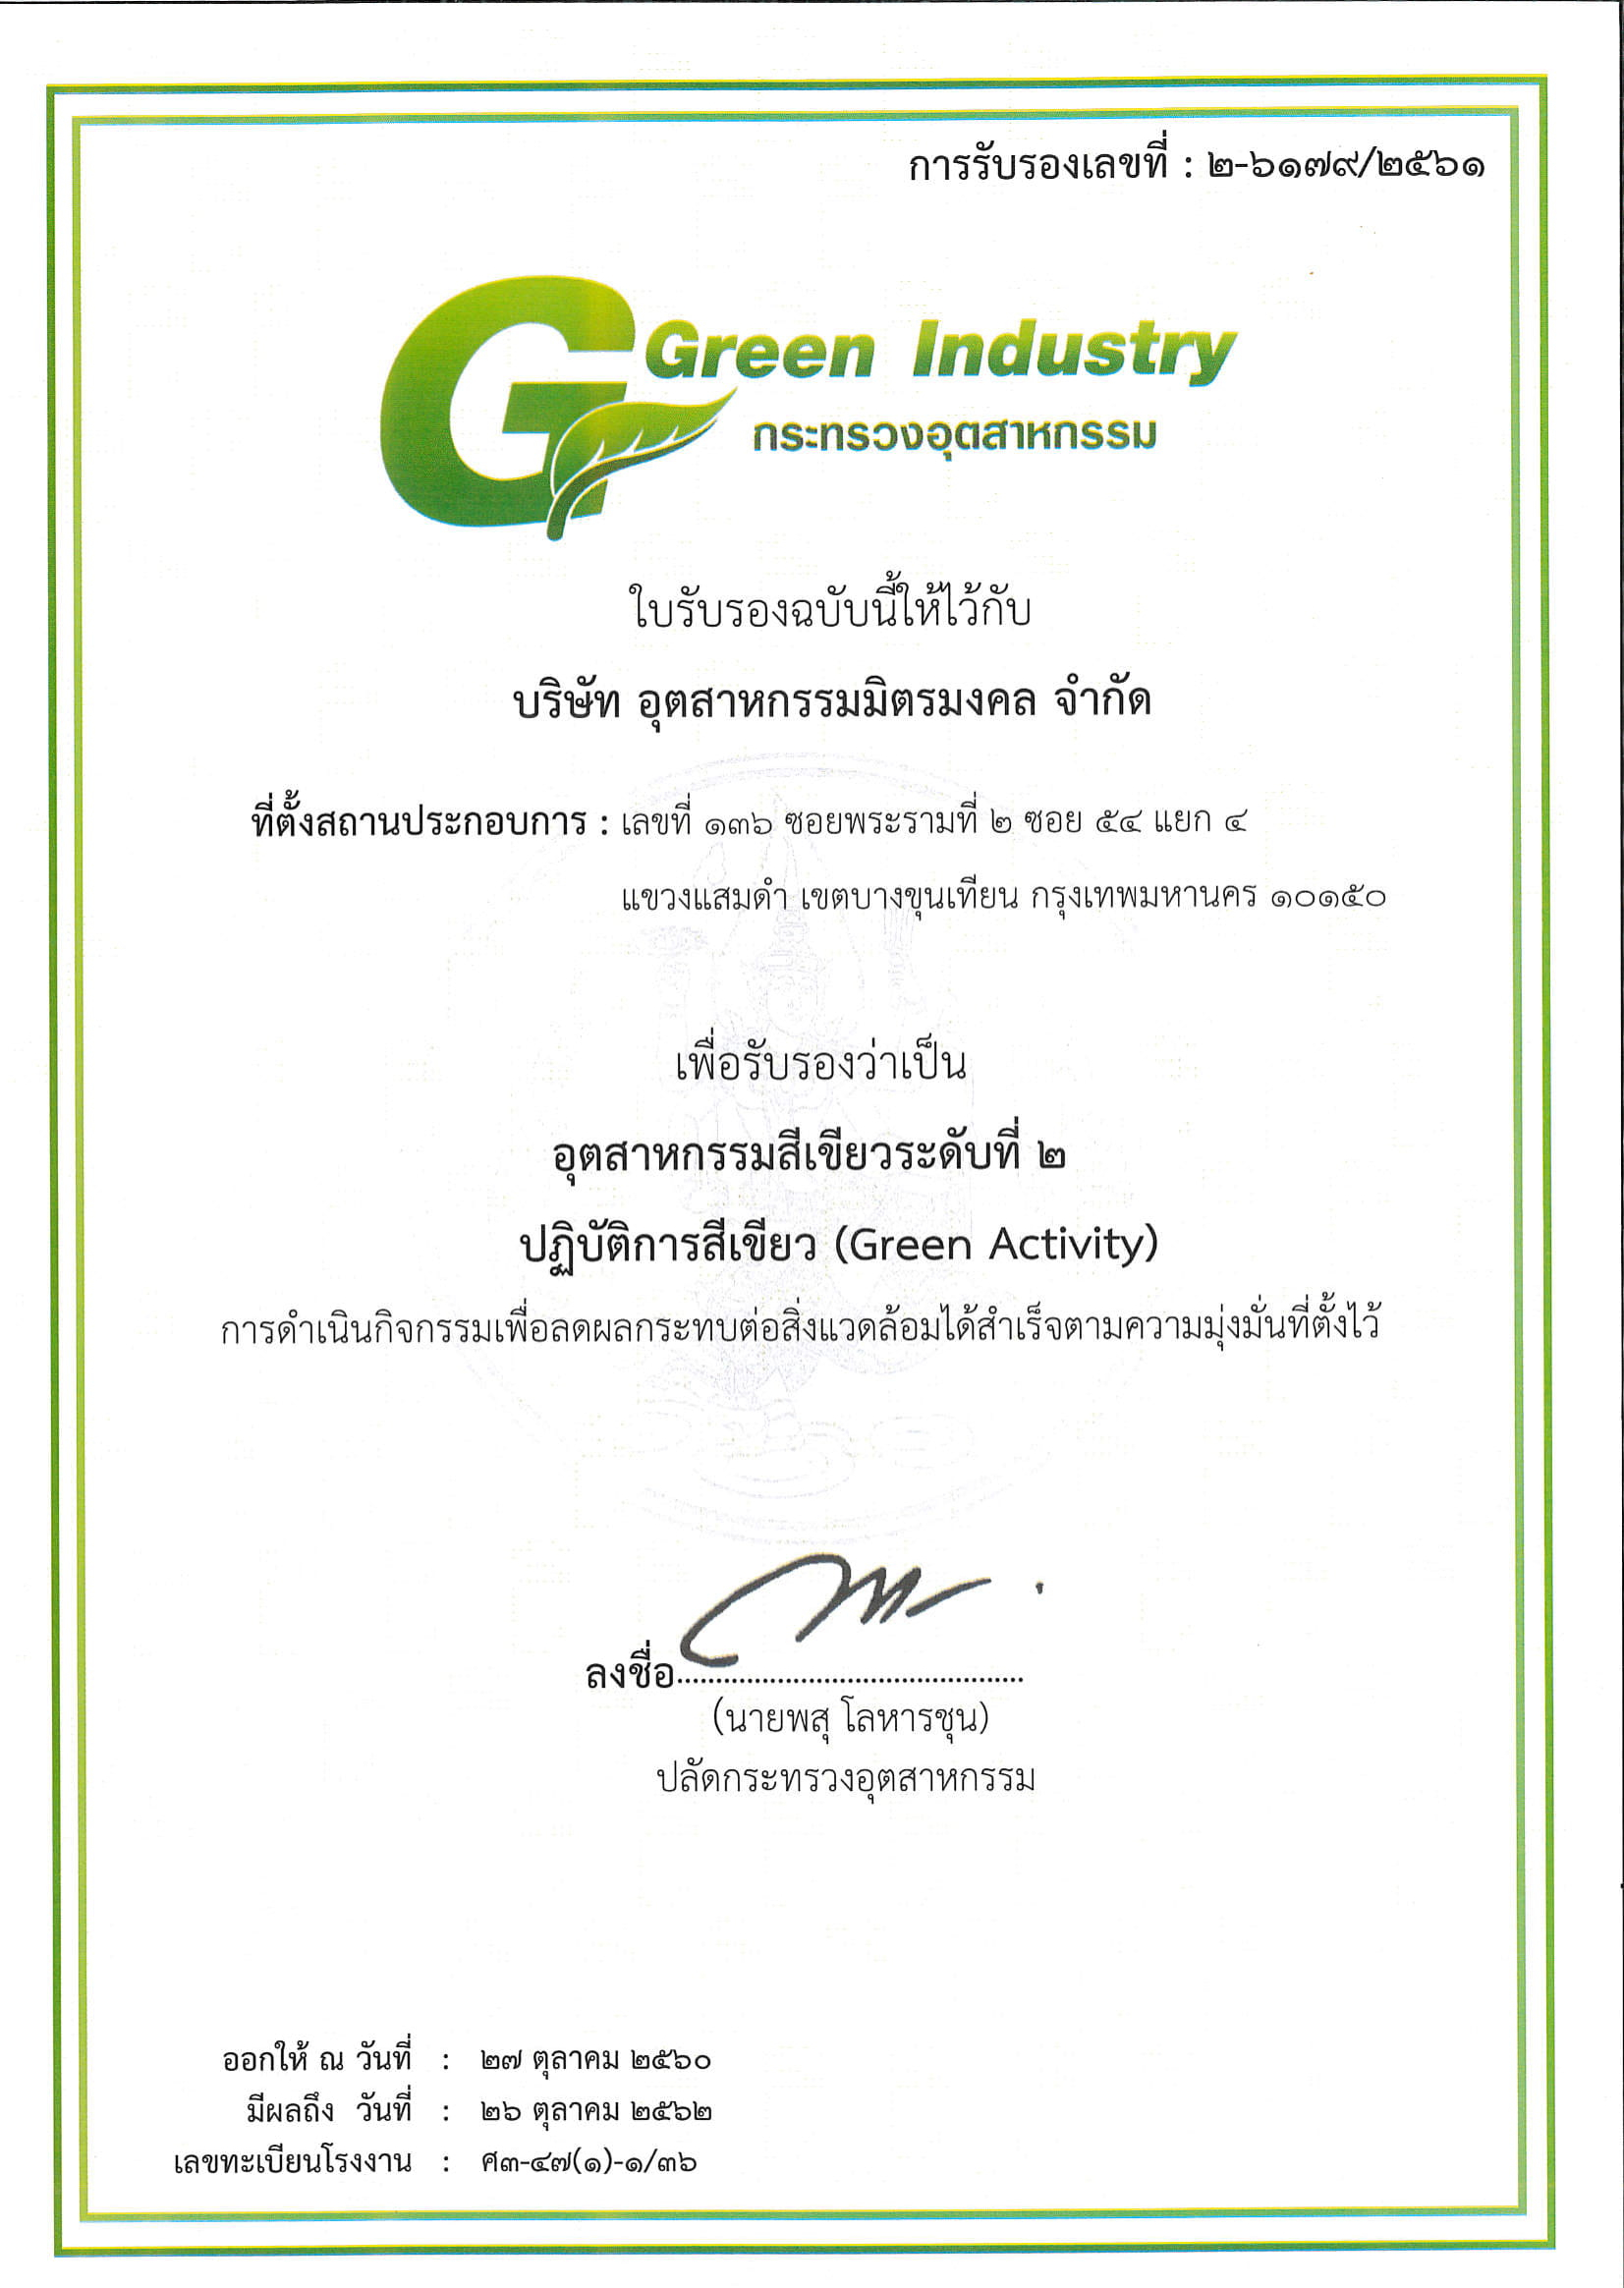 Green Industry Level 2